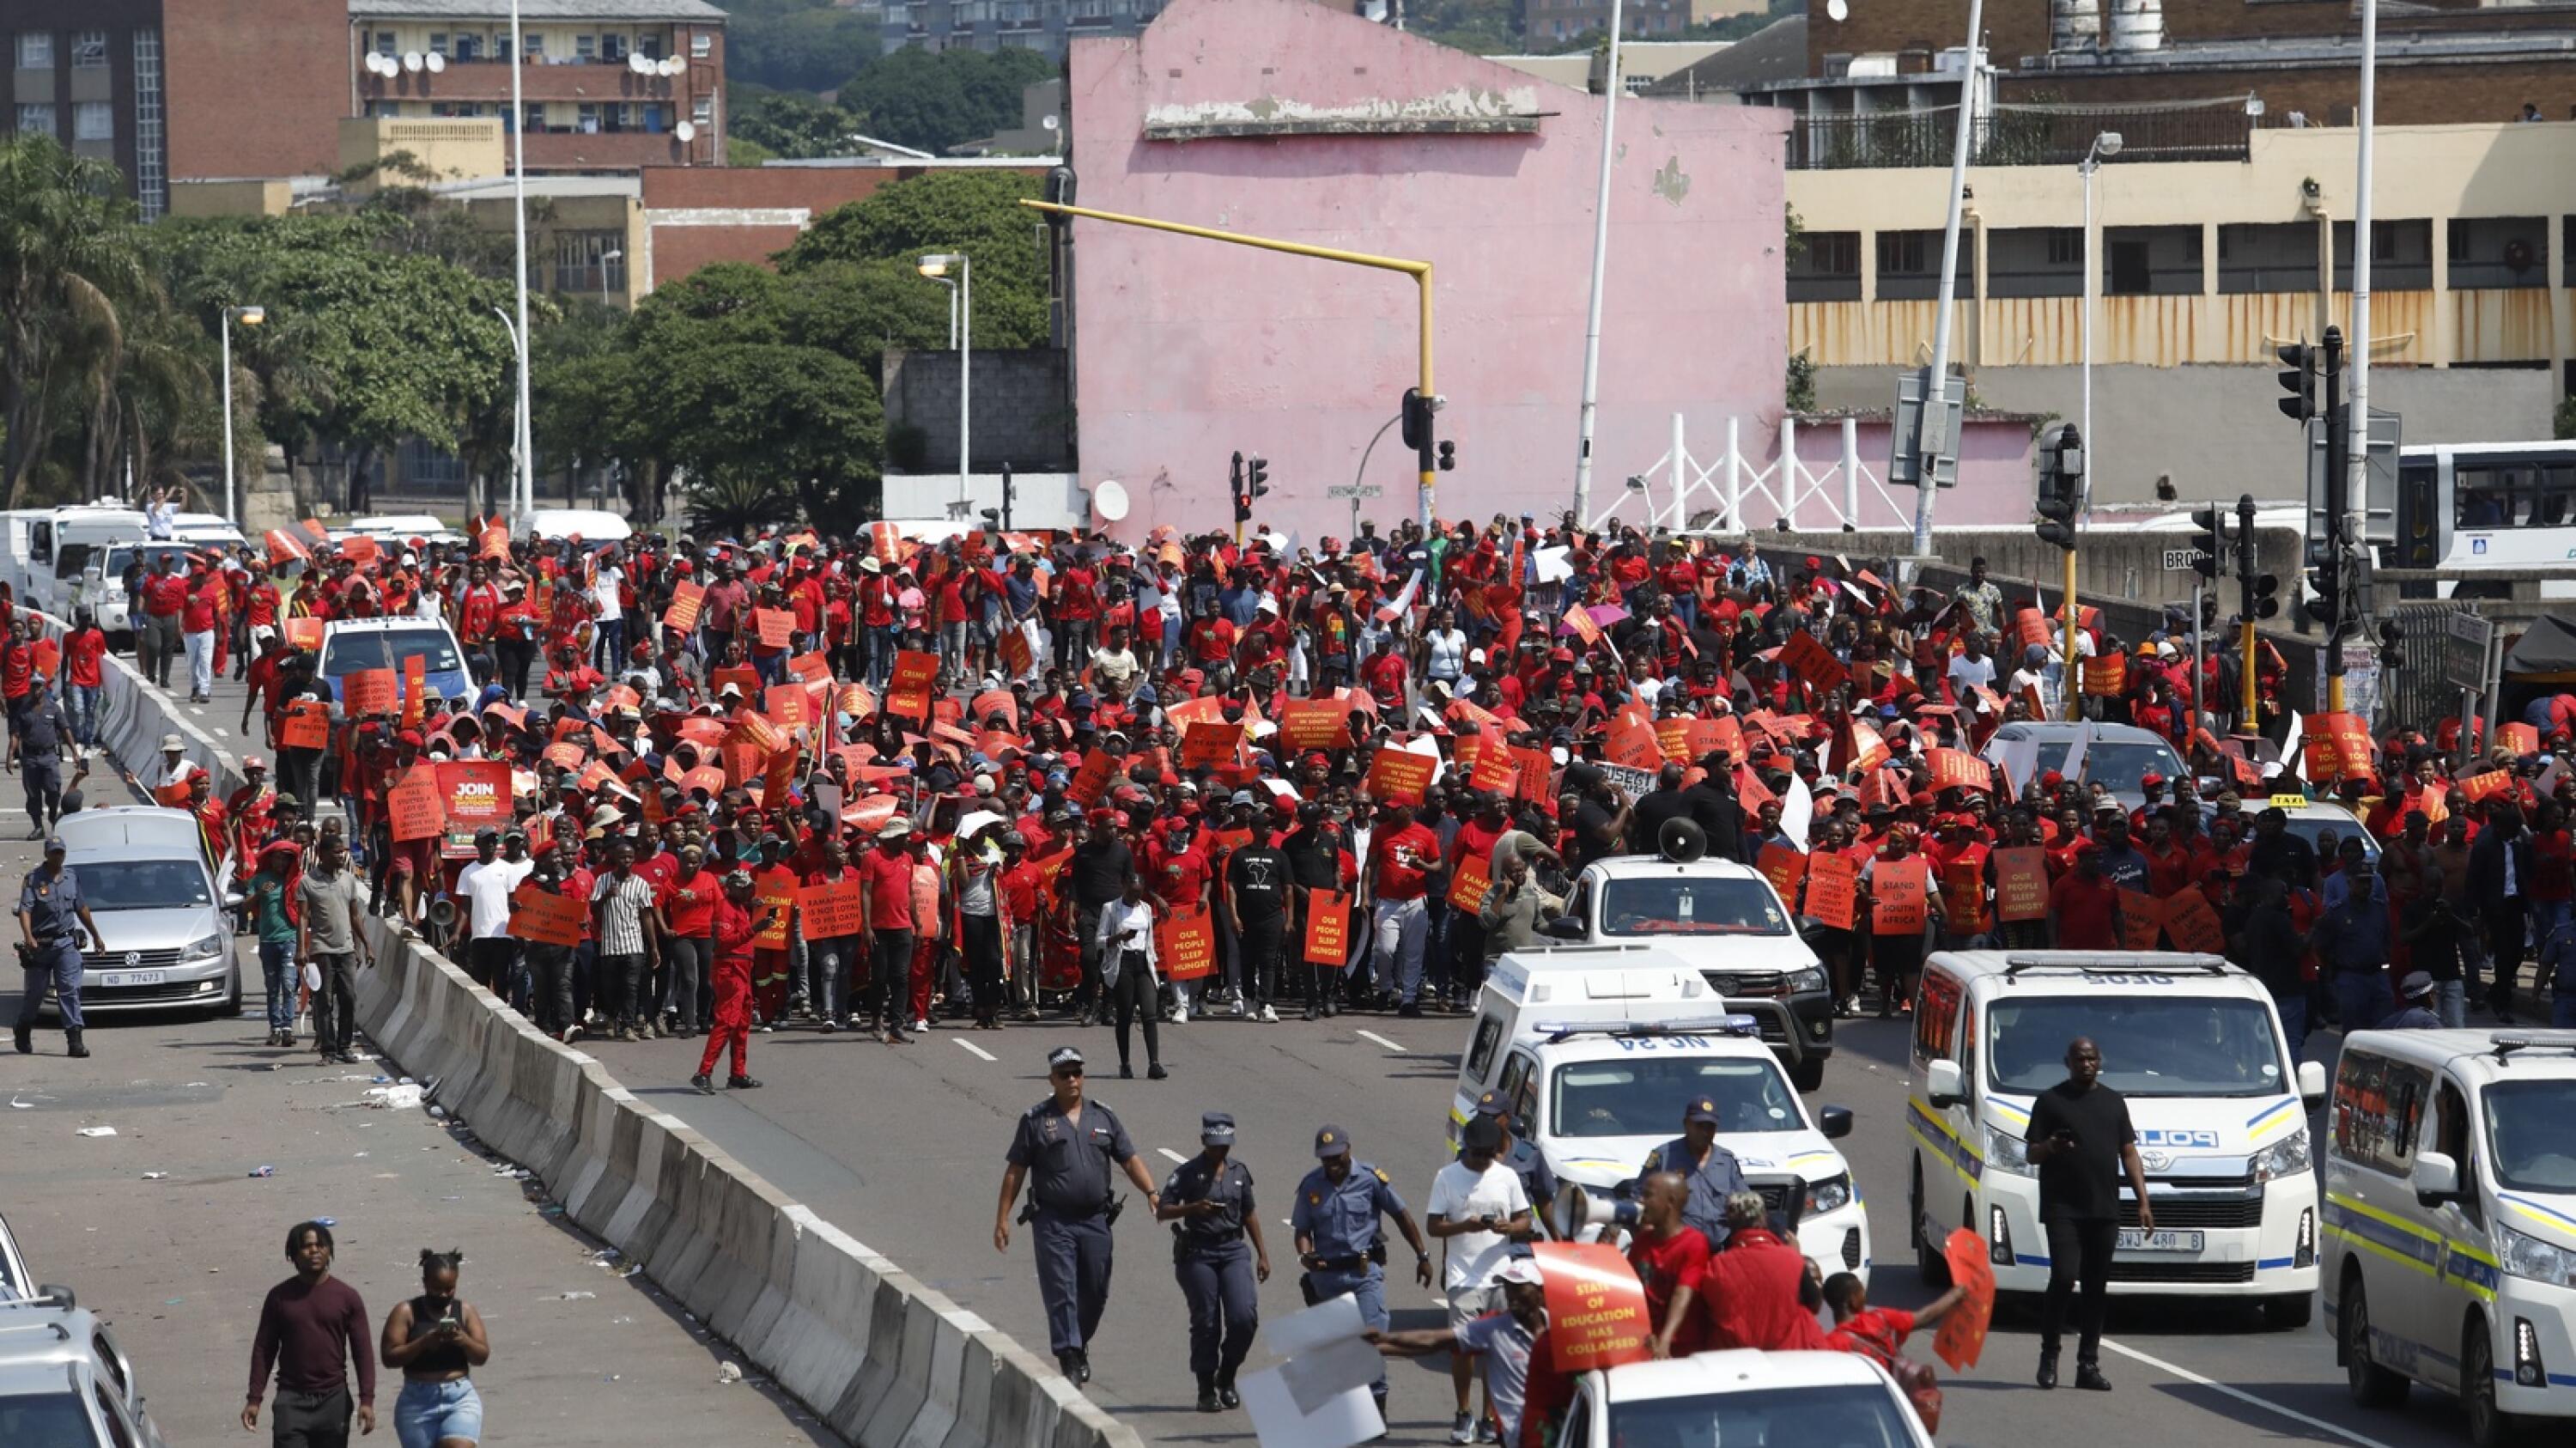 EFF supporters during their march in Durban.